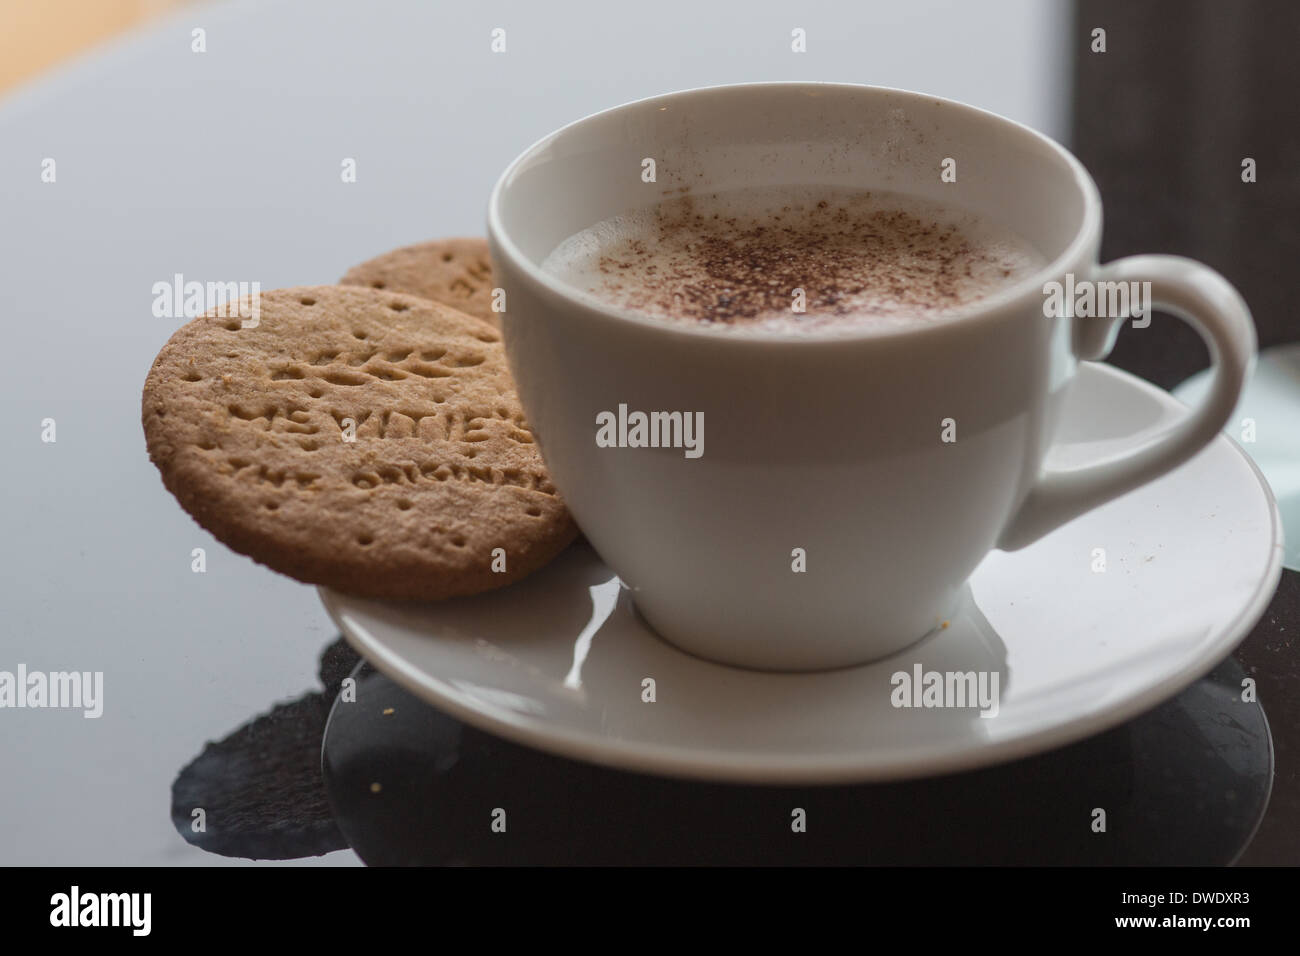 Cappuccino and Biscuits Stock Photo